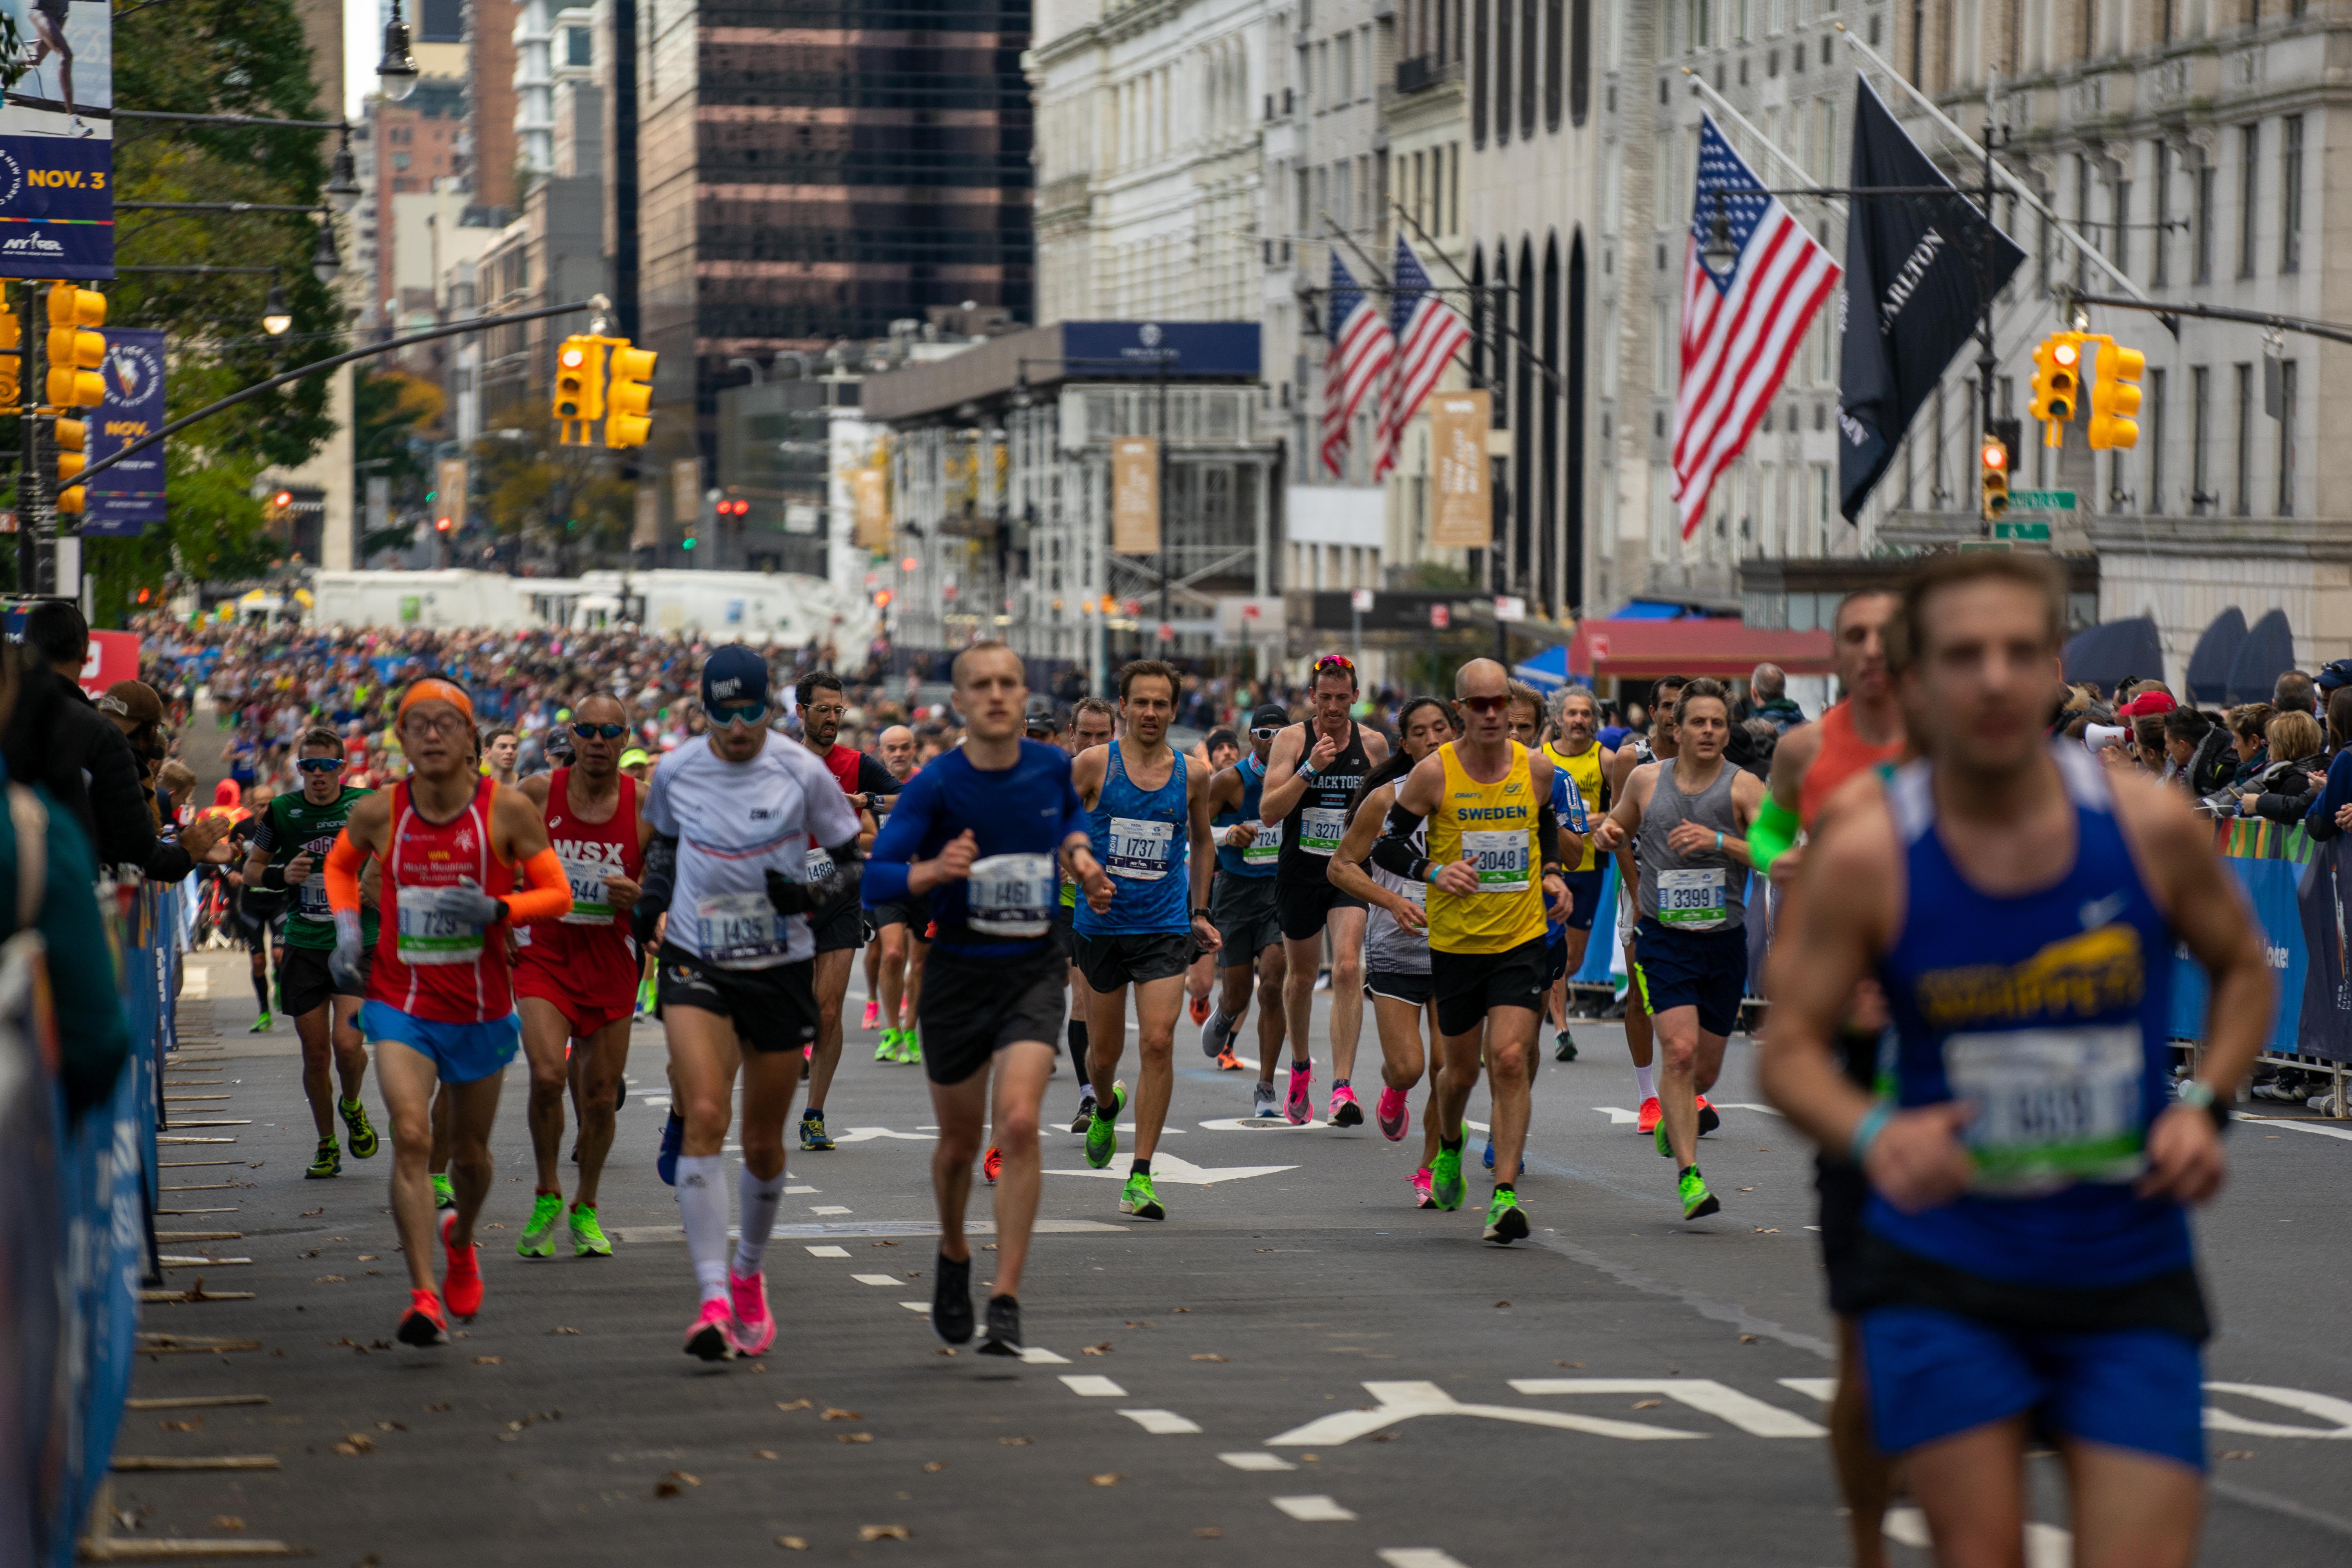 Runners on a street in New York City during the race.